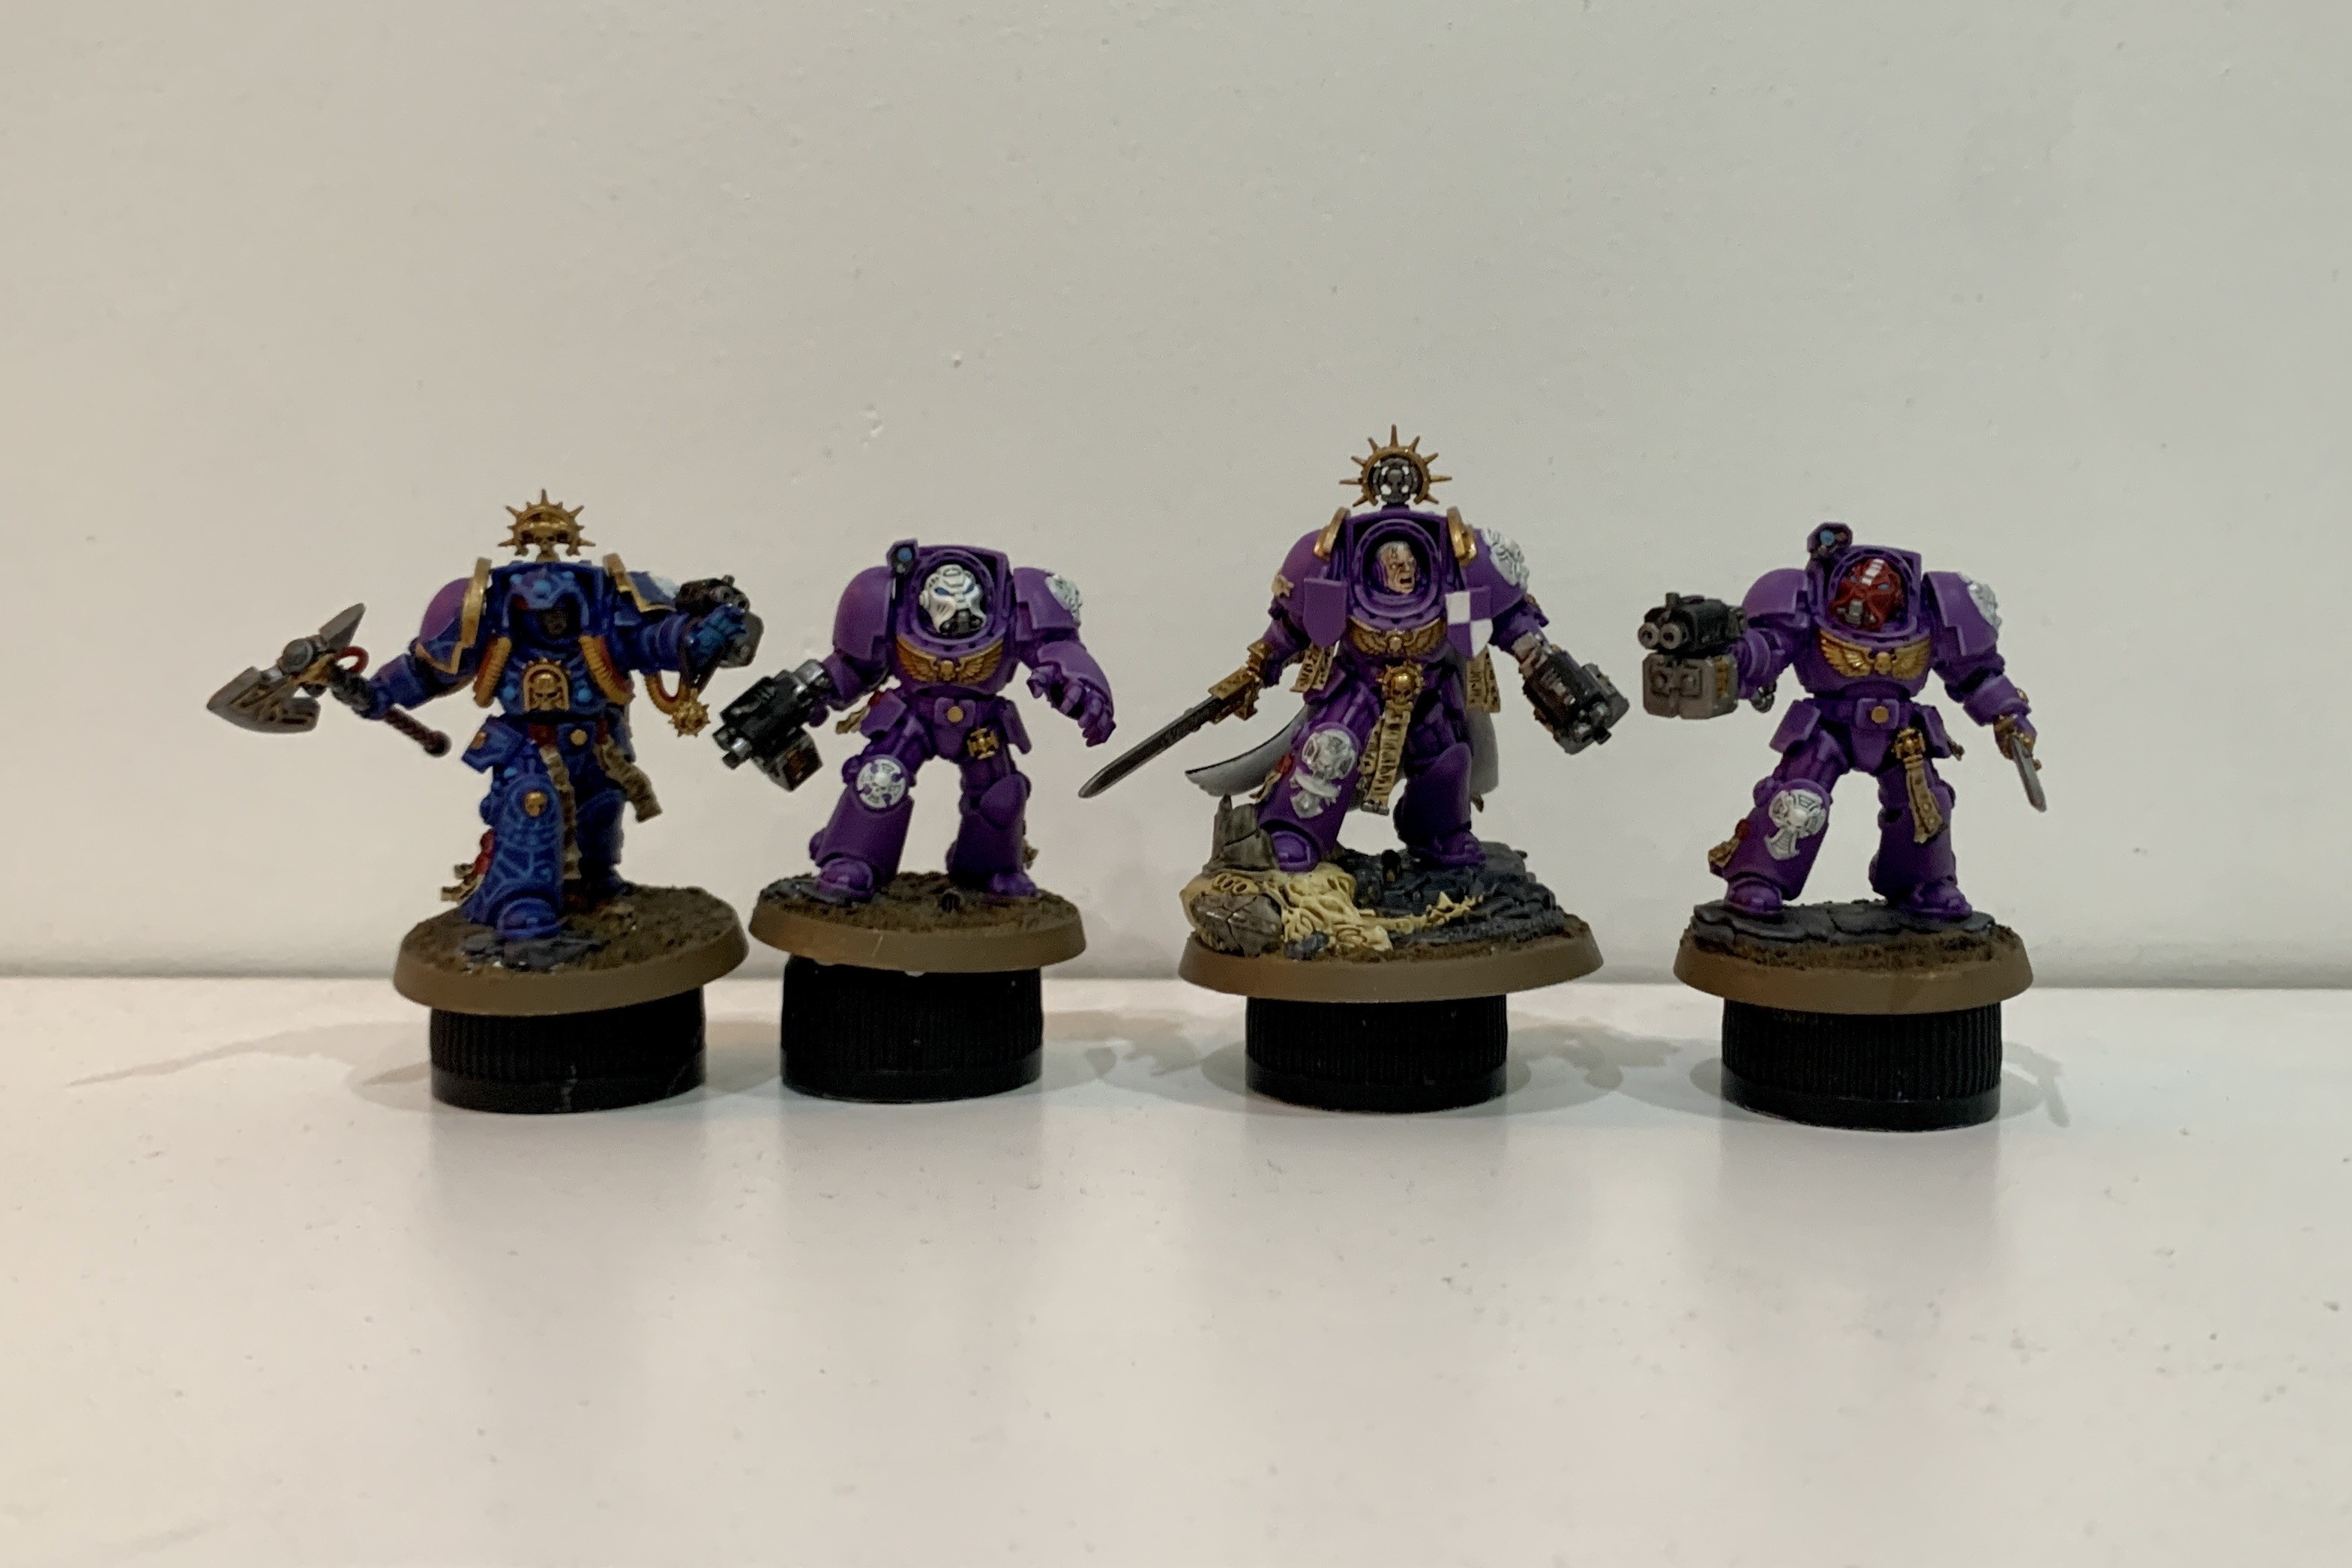 Four Warhammer 40k Terminator models. The leftmost is a Librarian in dark blue armour with gold trim, in his right hand is a ax, his left hand is held upwards and glowing blue. His armour also has several mutlicololured tubes. The other three models are in purple and gold armour. The righ centre model of these three is a captain stood on a the corpse of a Tyranid. The rightmost model is wearing a red helmet with a white stripe and the other model has a white helmet.